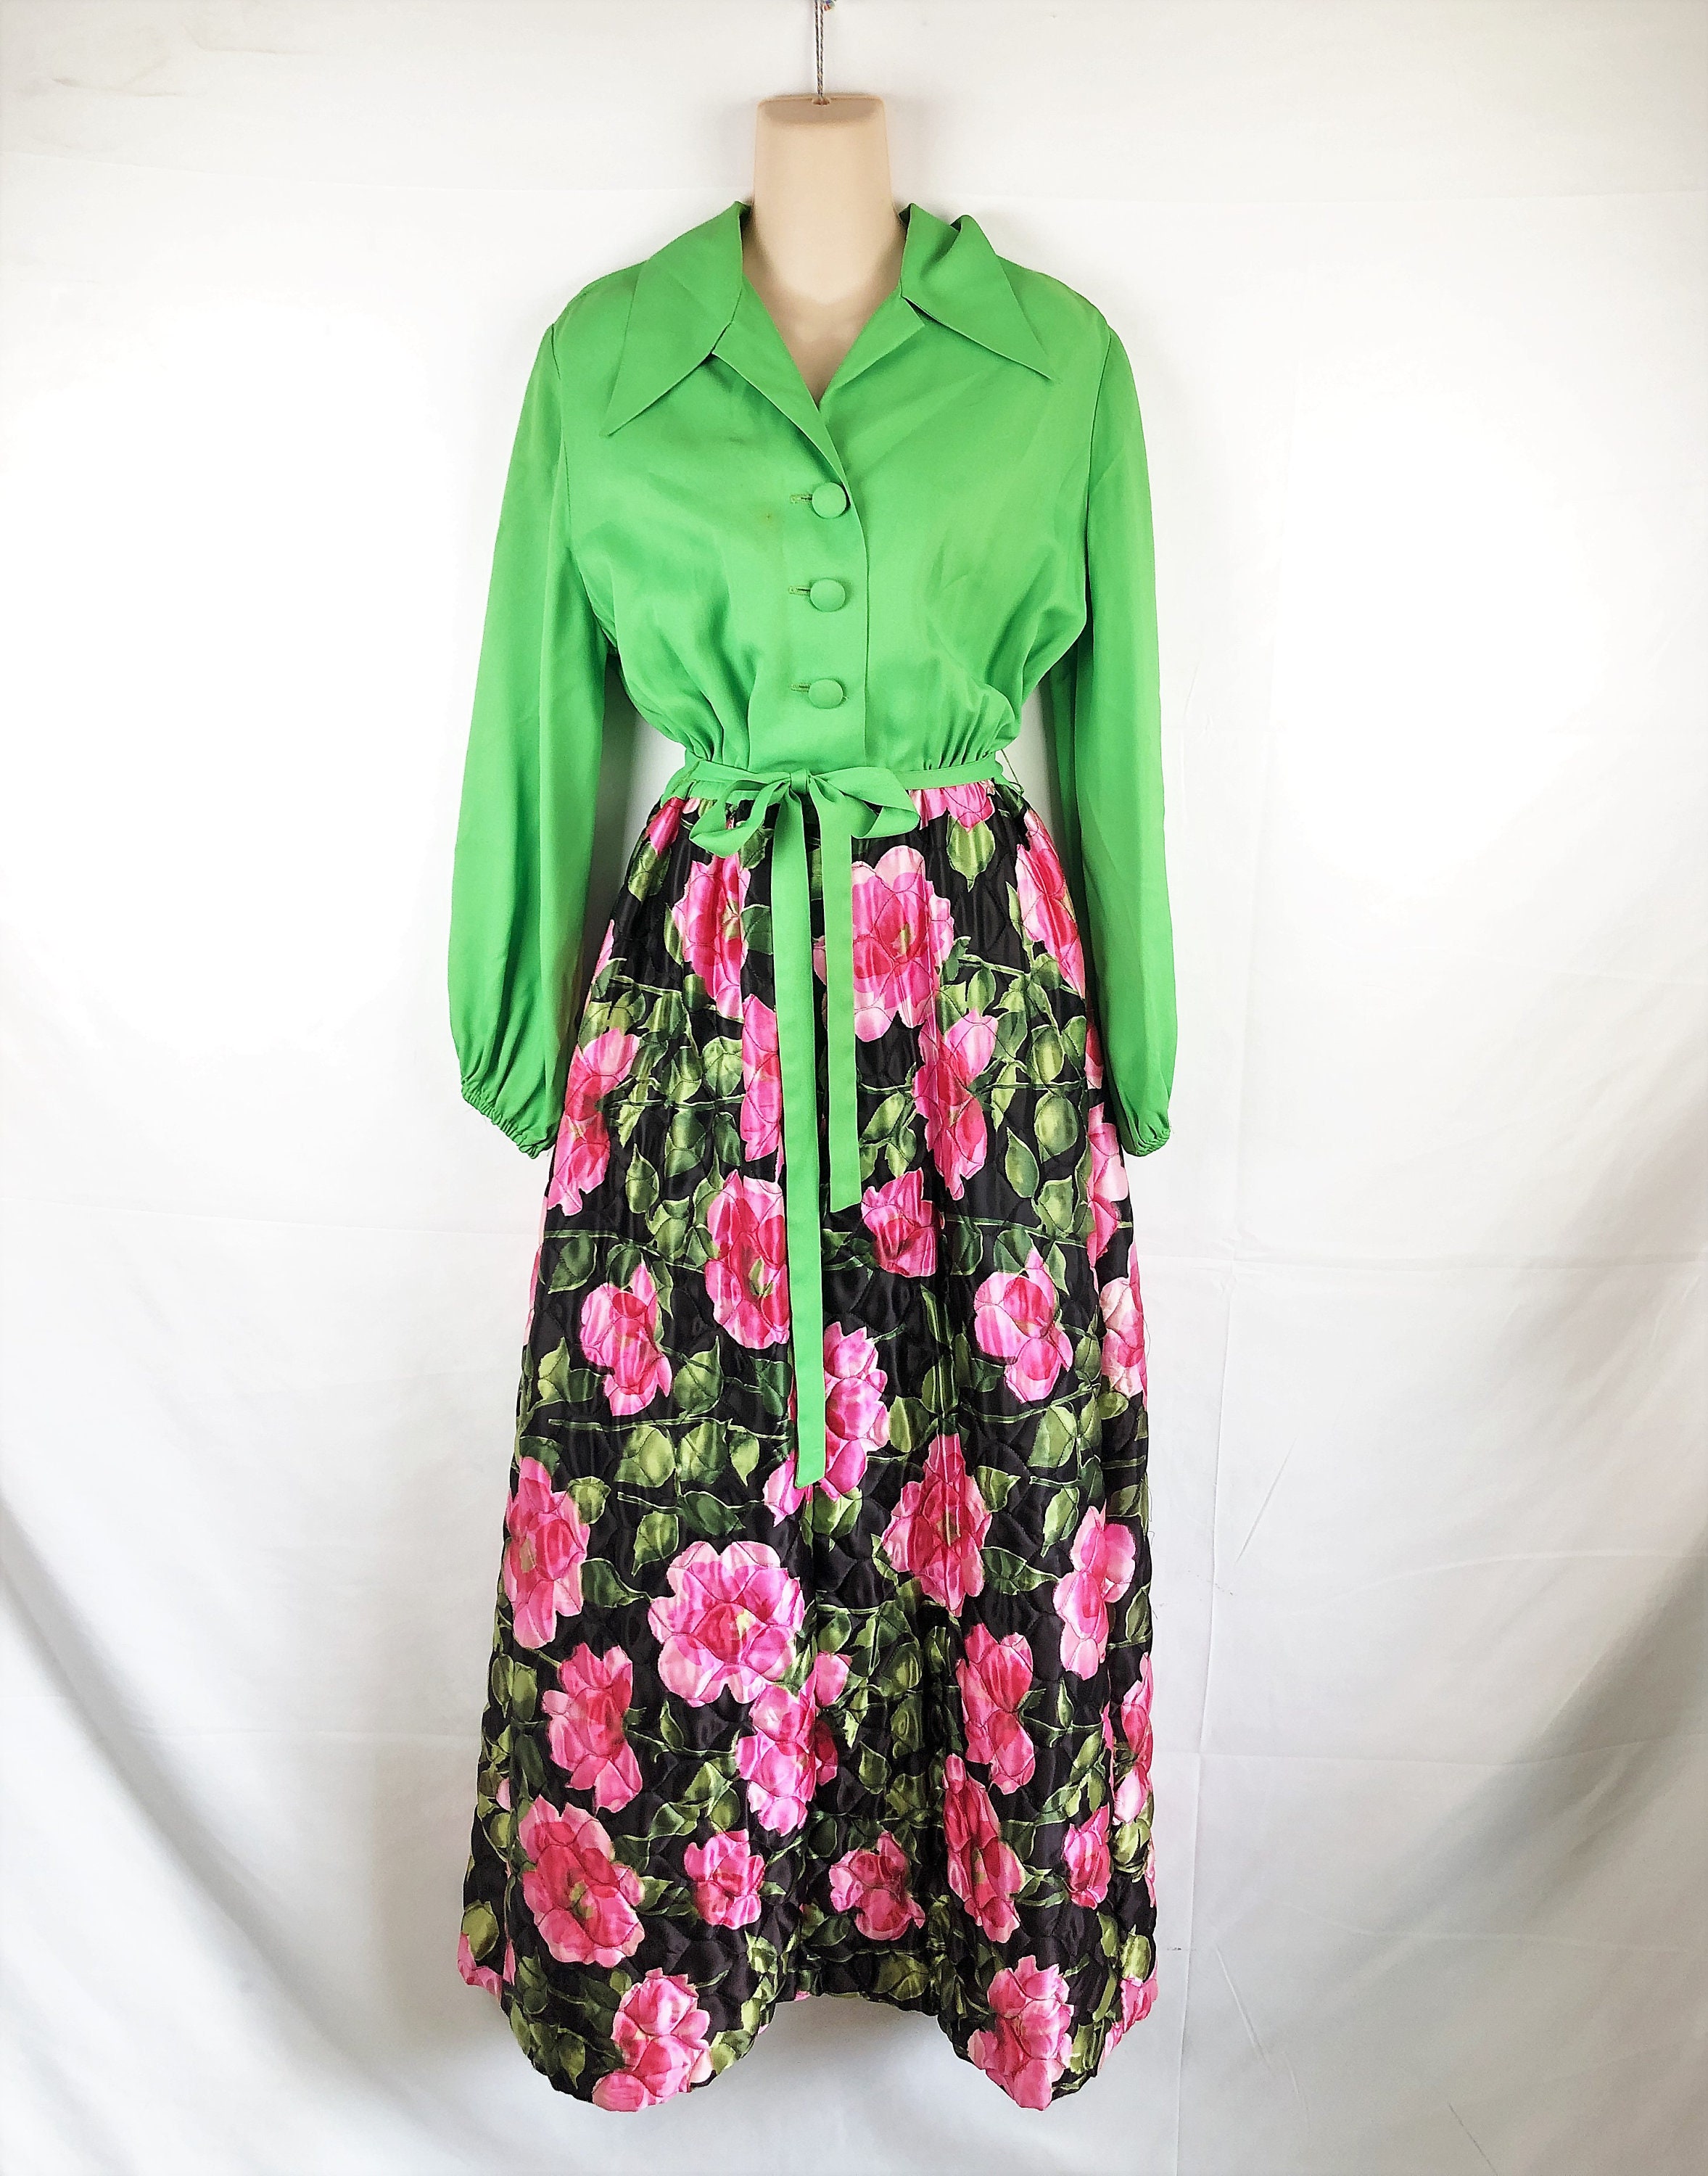 Vintage 1960s Sears At Home Wear Maxi Lounge Dress Size 14 Quilted Colorful Mod a15